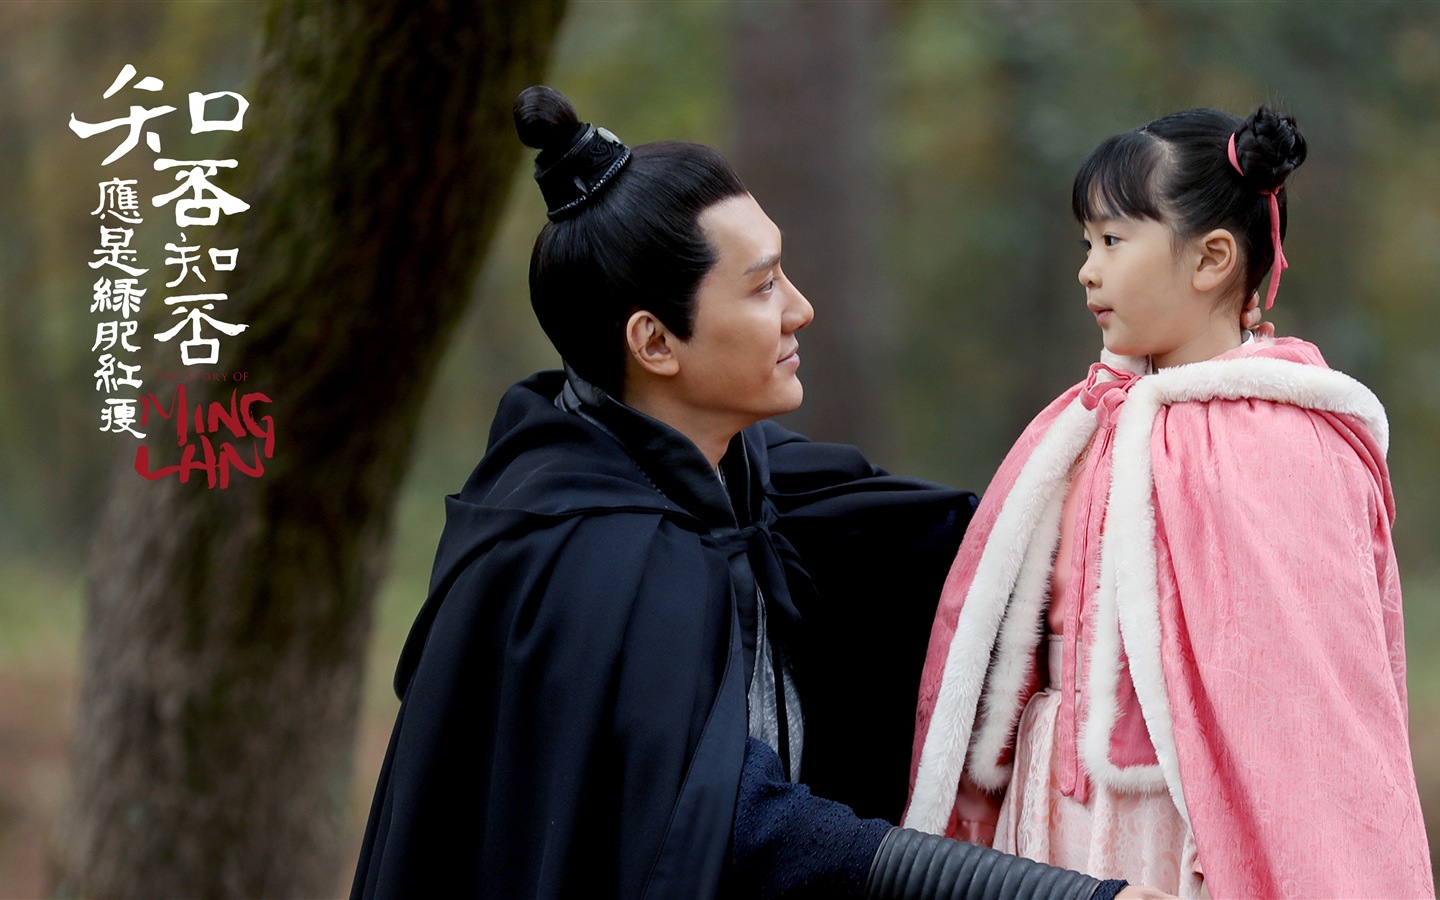 The Story Of MingLan, TV series HD wallpapers #21 - 1440x900